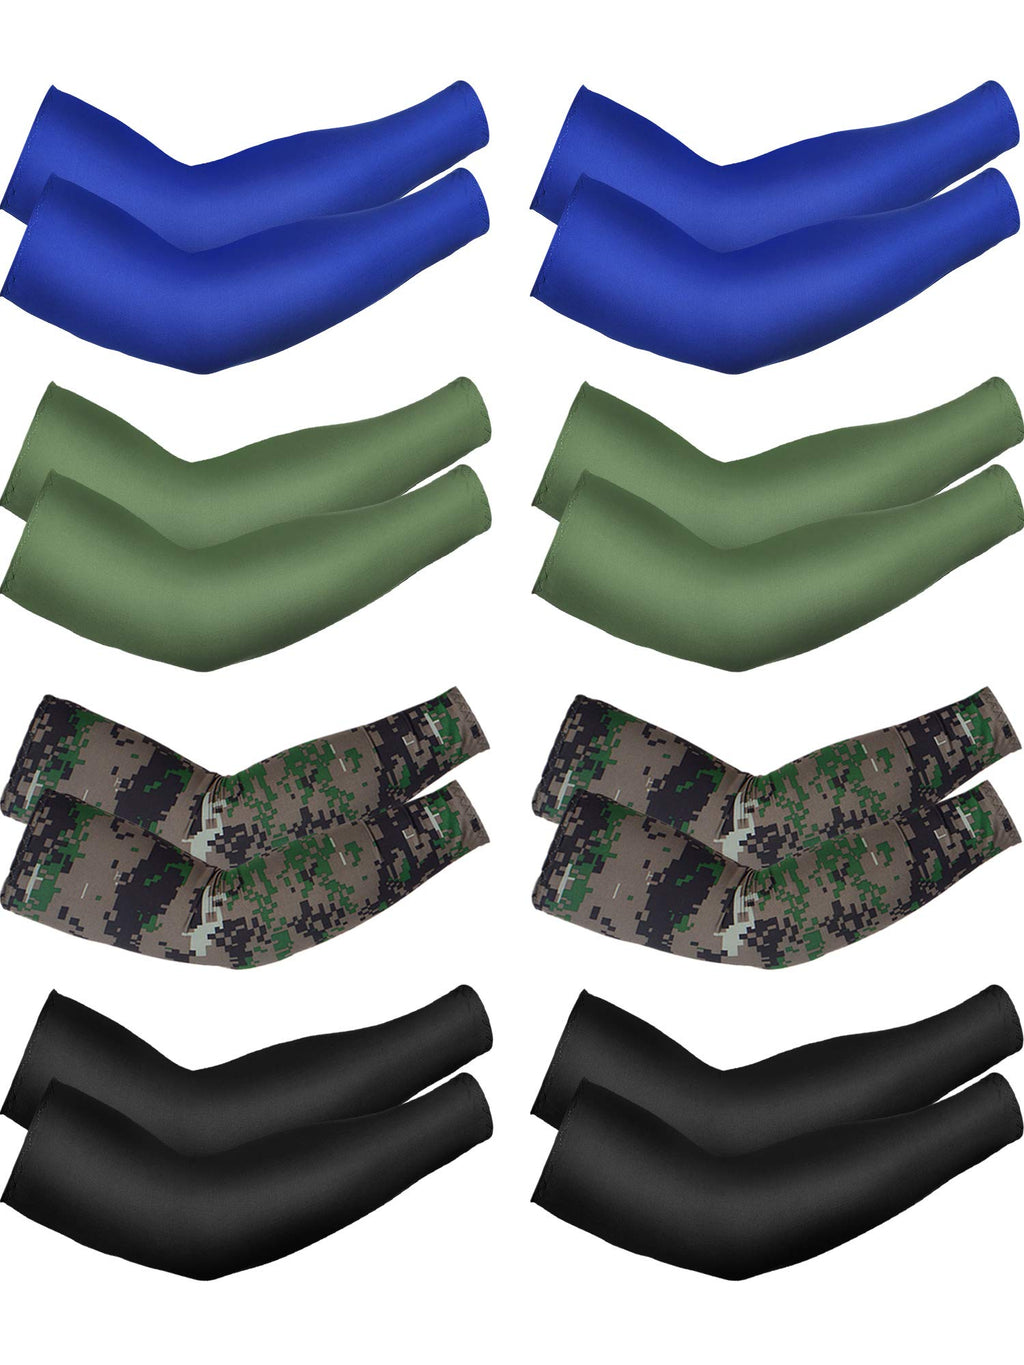  [AUSTRALIA] - 8 Pairs Unisex UV Protection Arm Cooling Sleeves Ice Silk Arm Cover (Black Blue Camouflage Dark-green, Ice Silk)